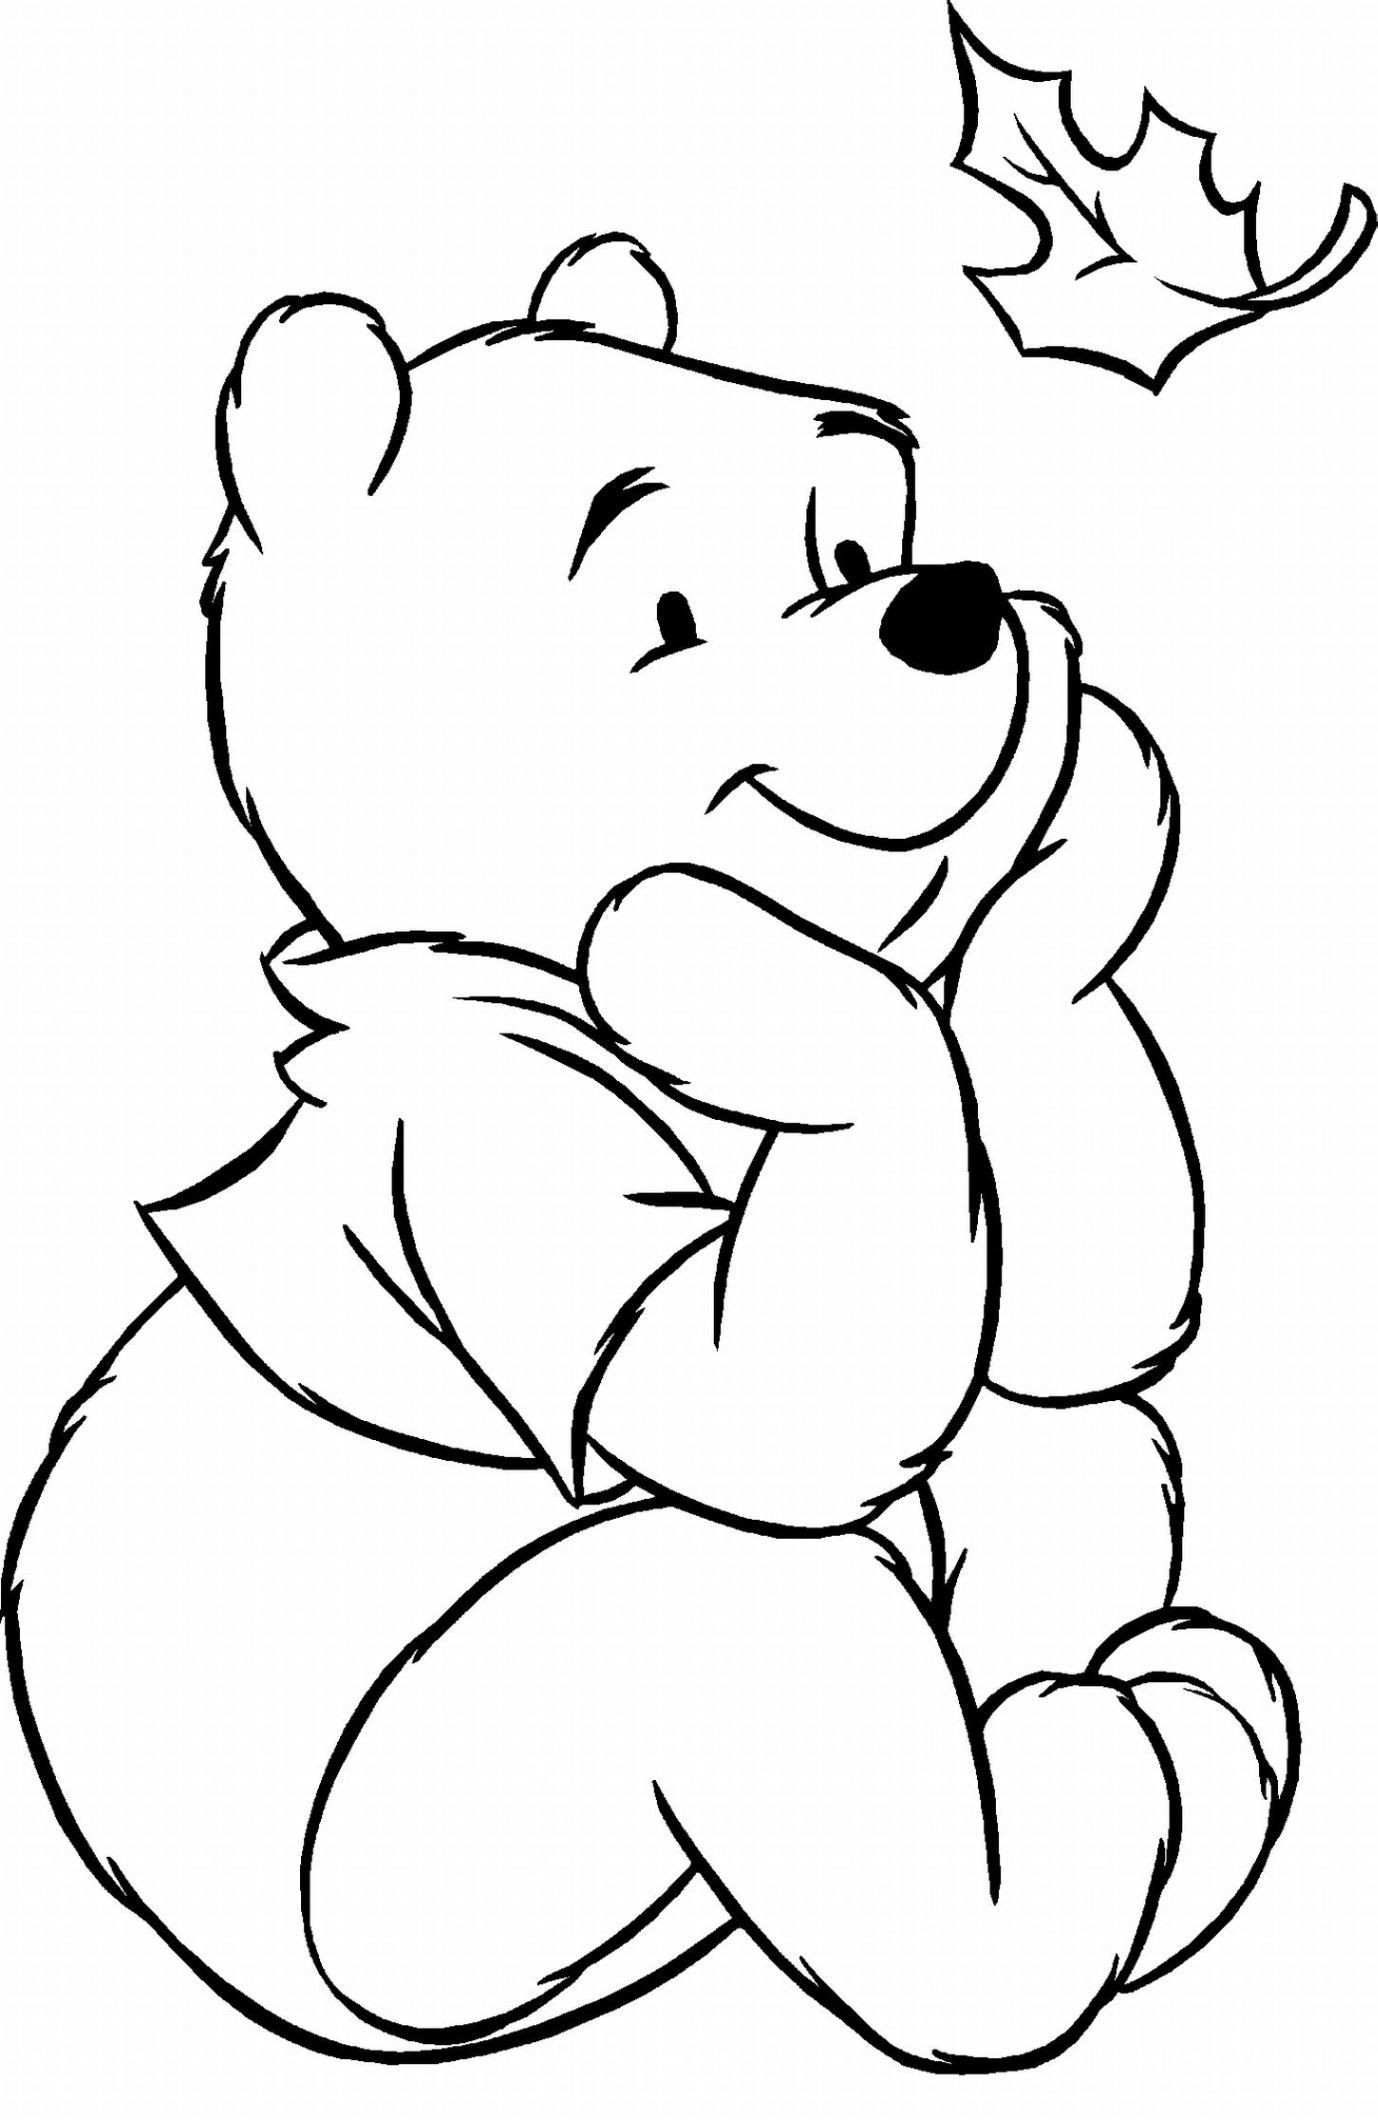 Disney Coloring Pages For Kids
 Free Coloring Pages Disney For Kids Image 3